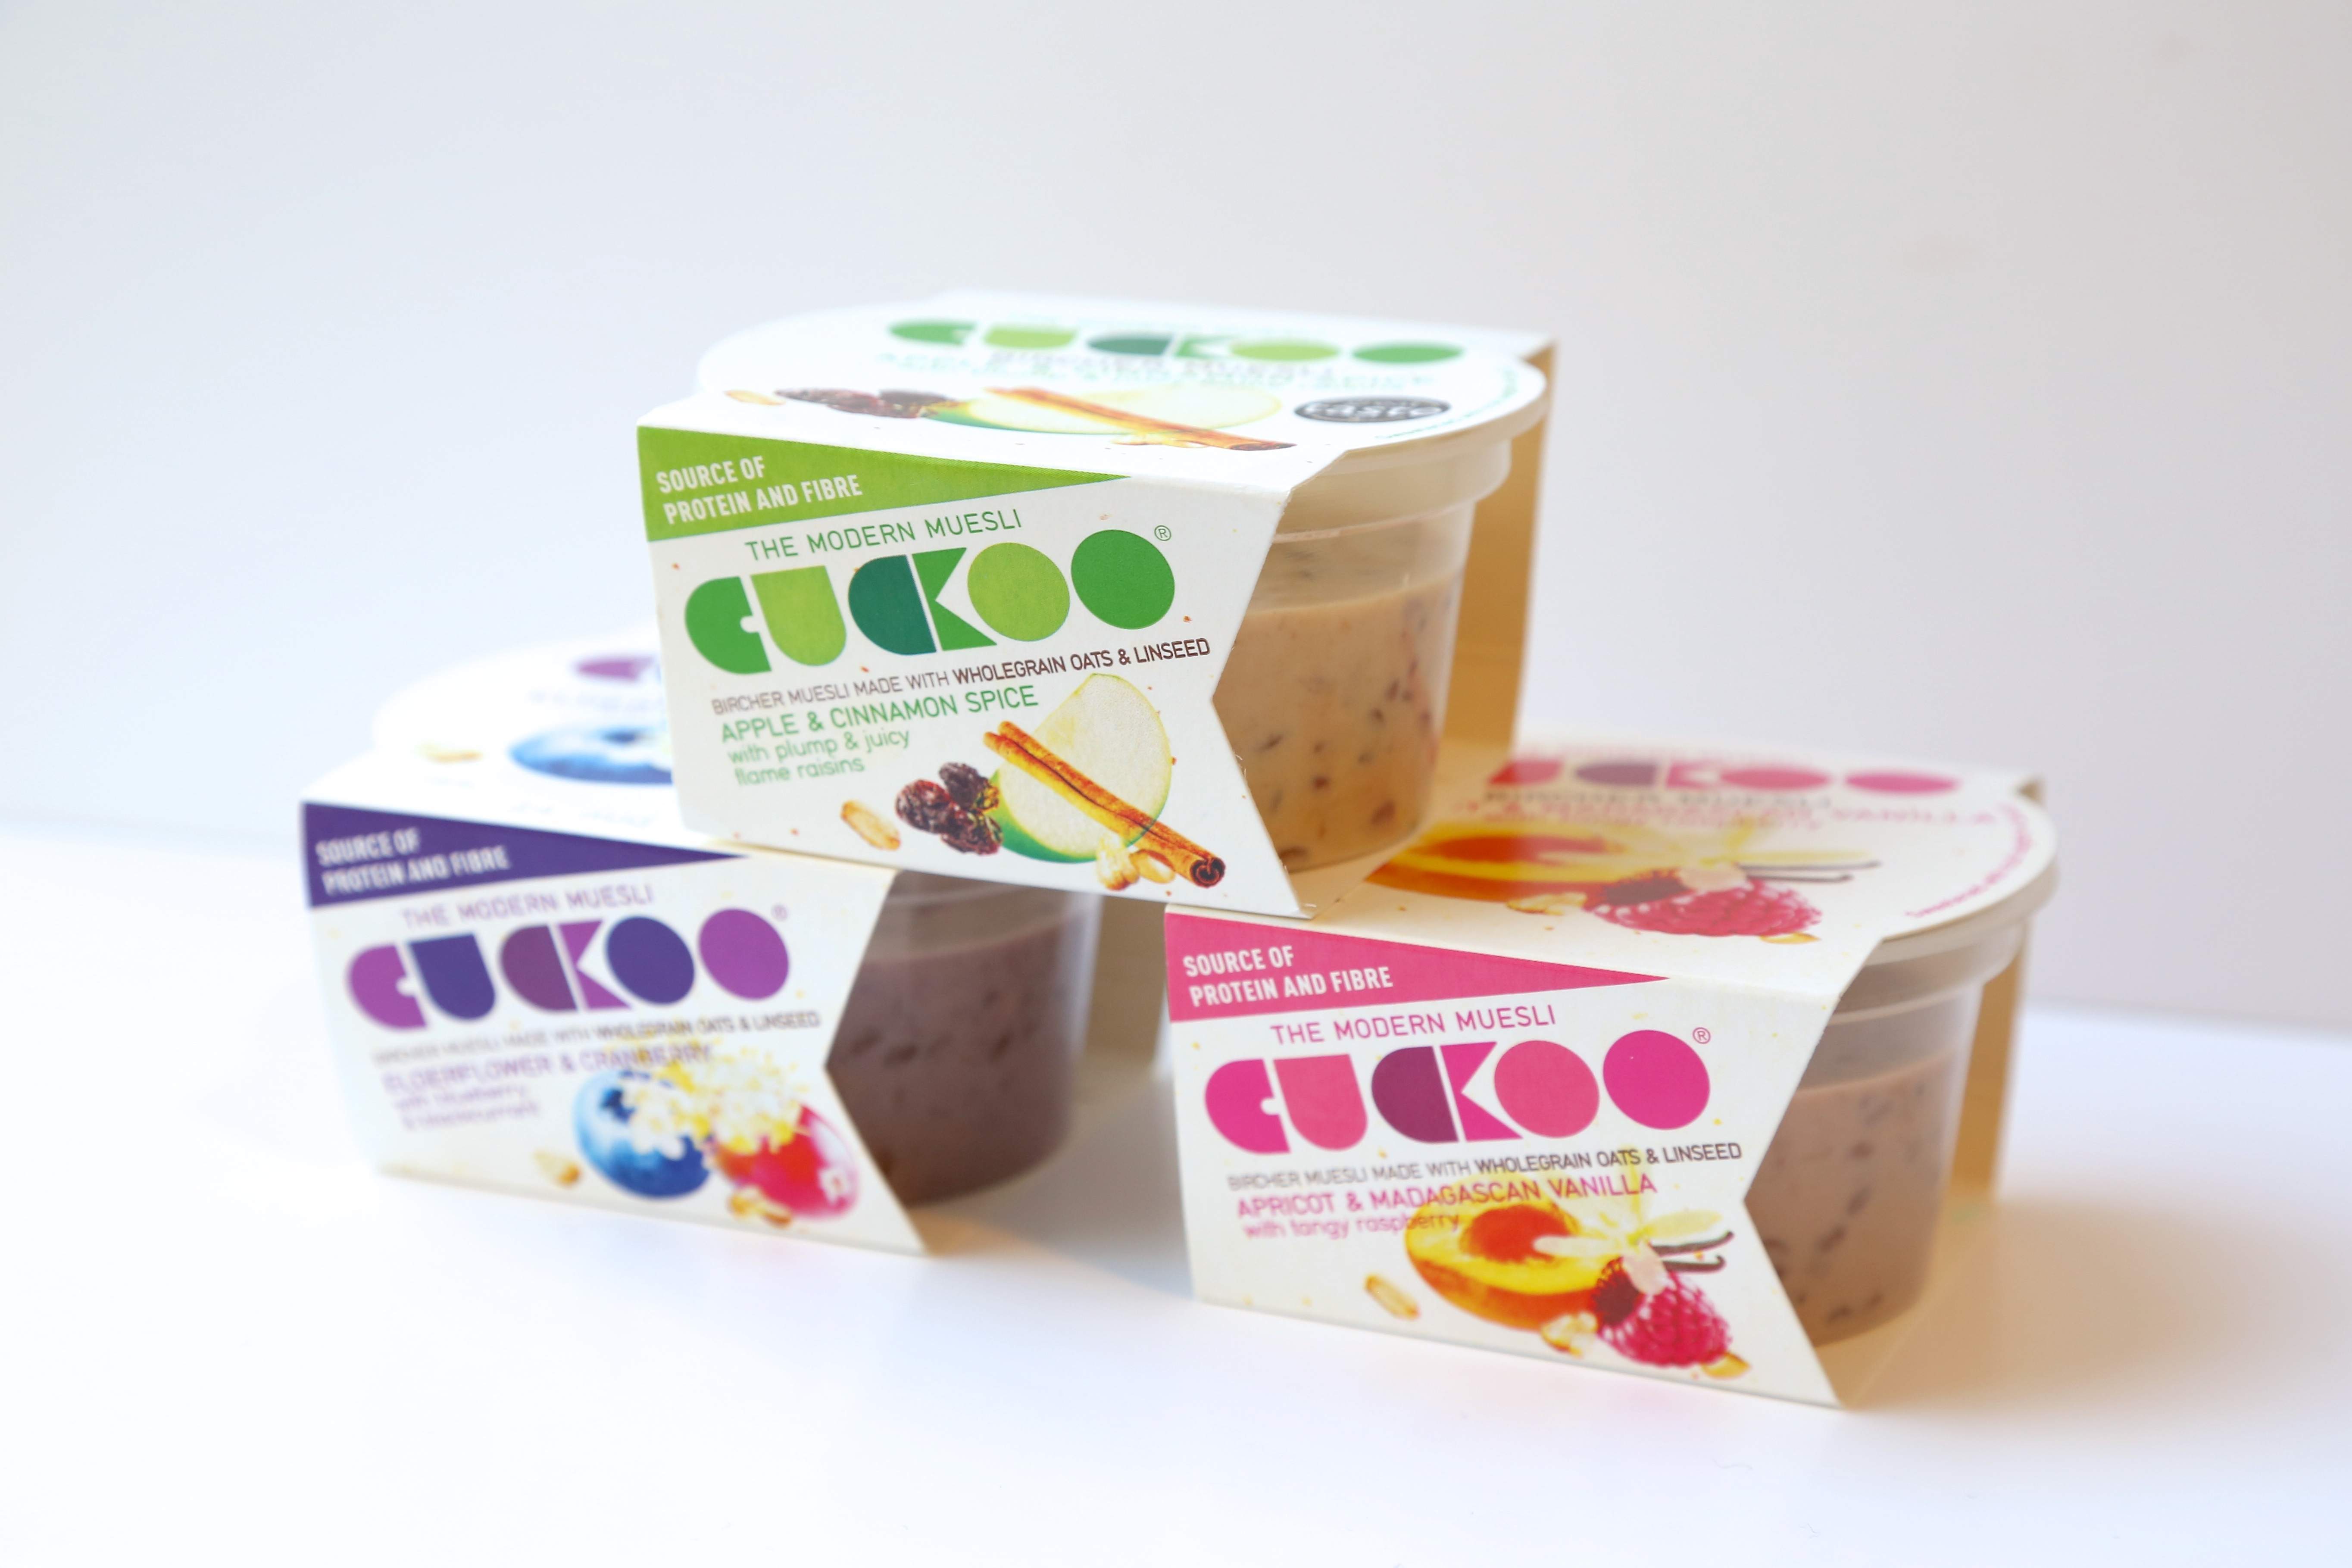 CUCKOO BIRCHER MUESLI REBRANDS, LAUNCHES NEW PACK SIZE & SIGNS DEAL WITH BIDVEST 3663 TO GROW SALES